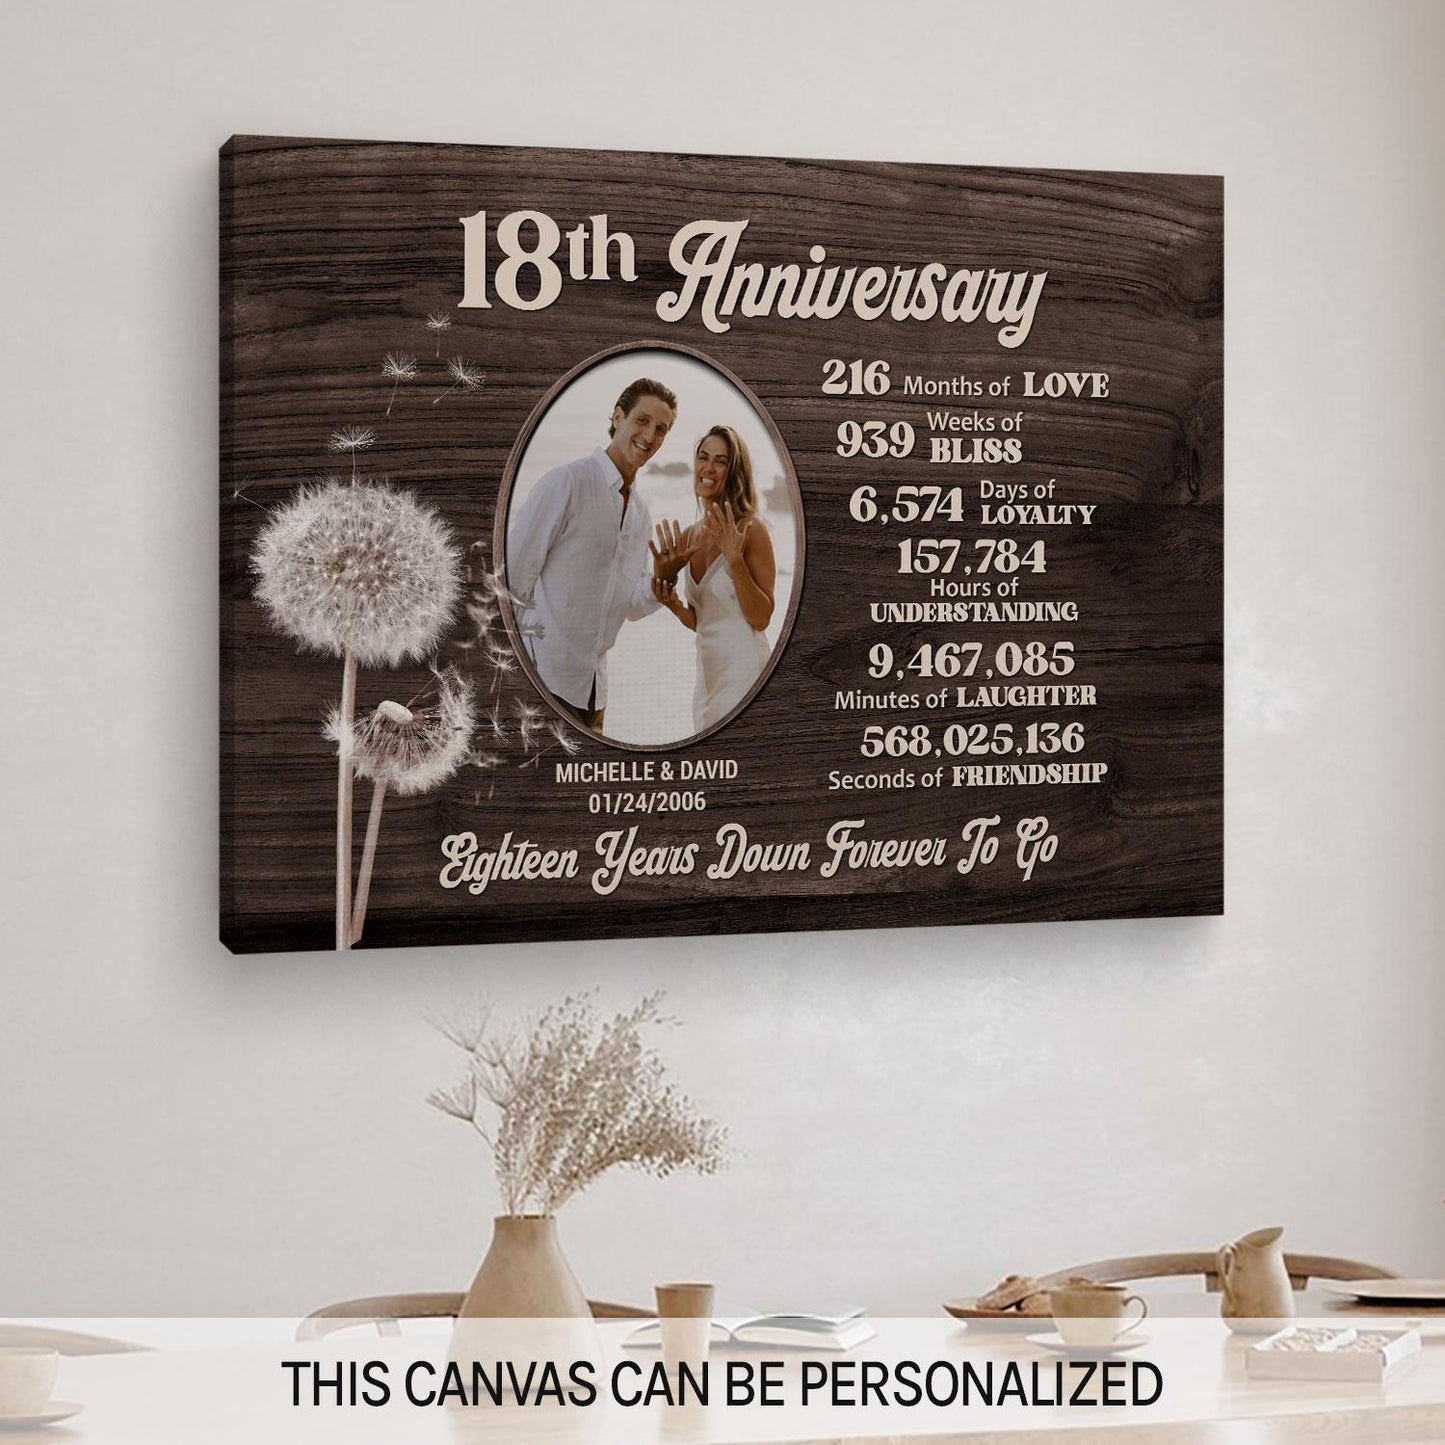 18th Anniversary - Personalized 18 Year Anniversary gift For Husband or Wife - Custom Canvas Print - MyMindfulGifts